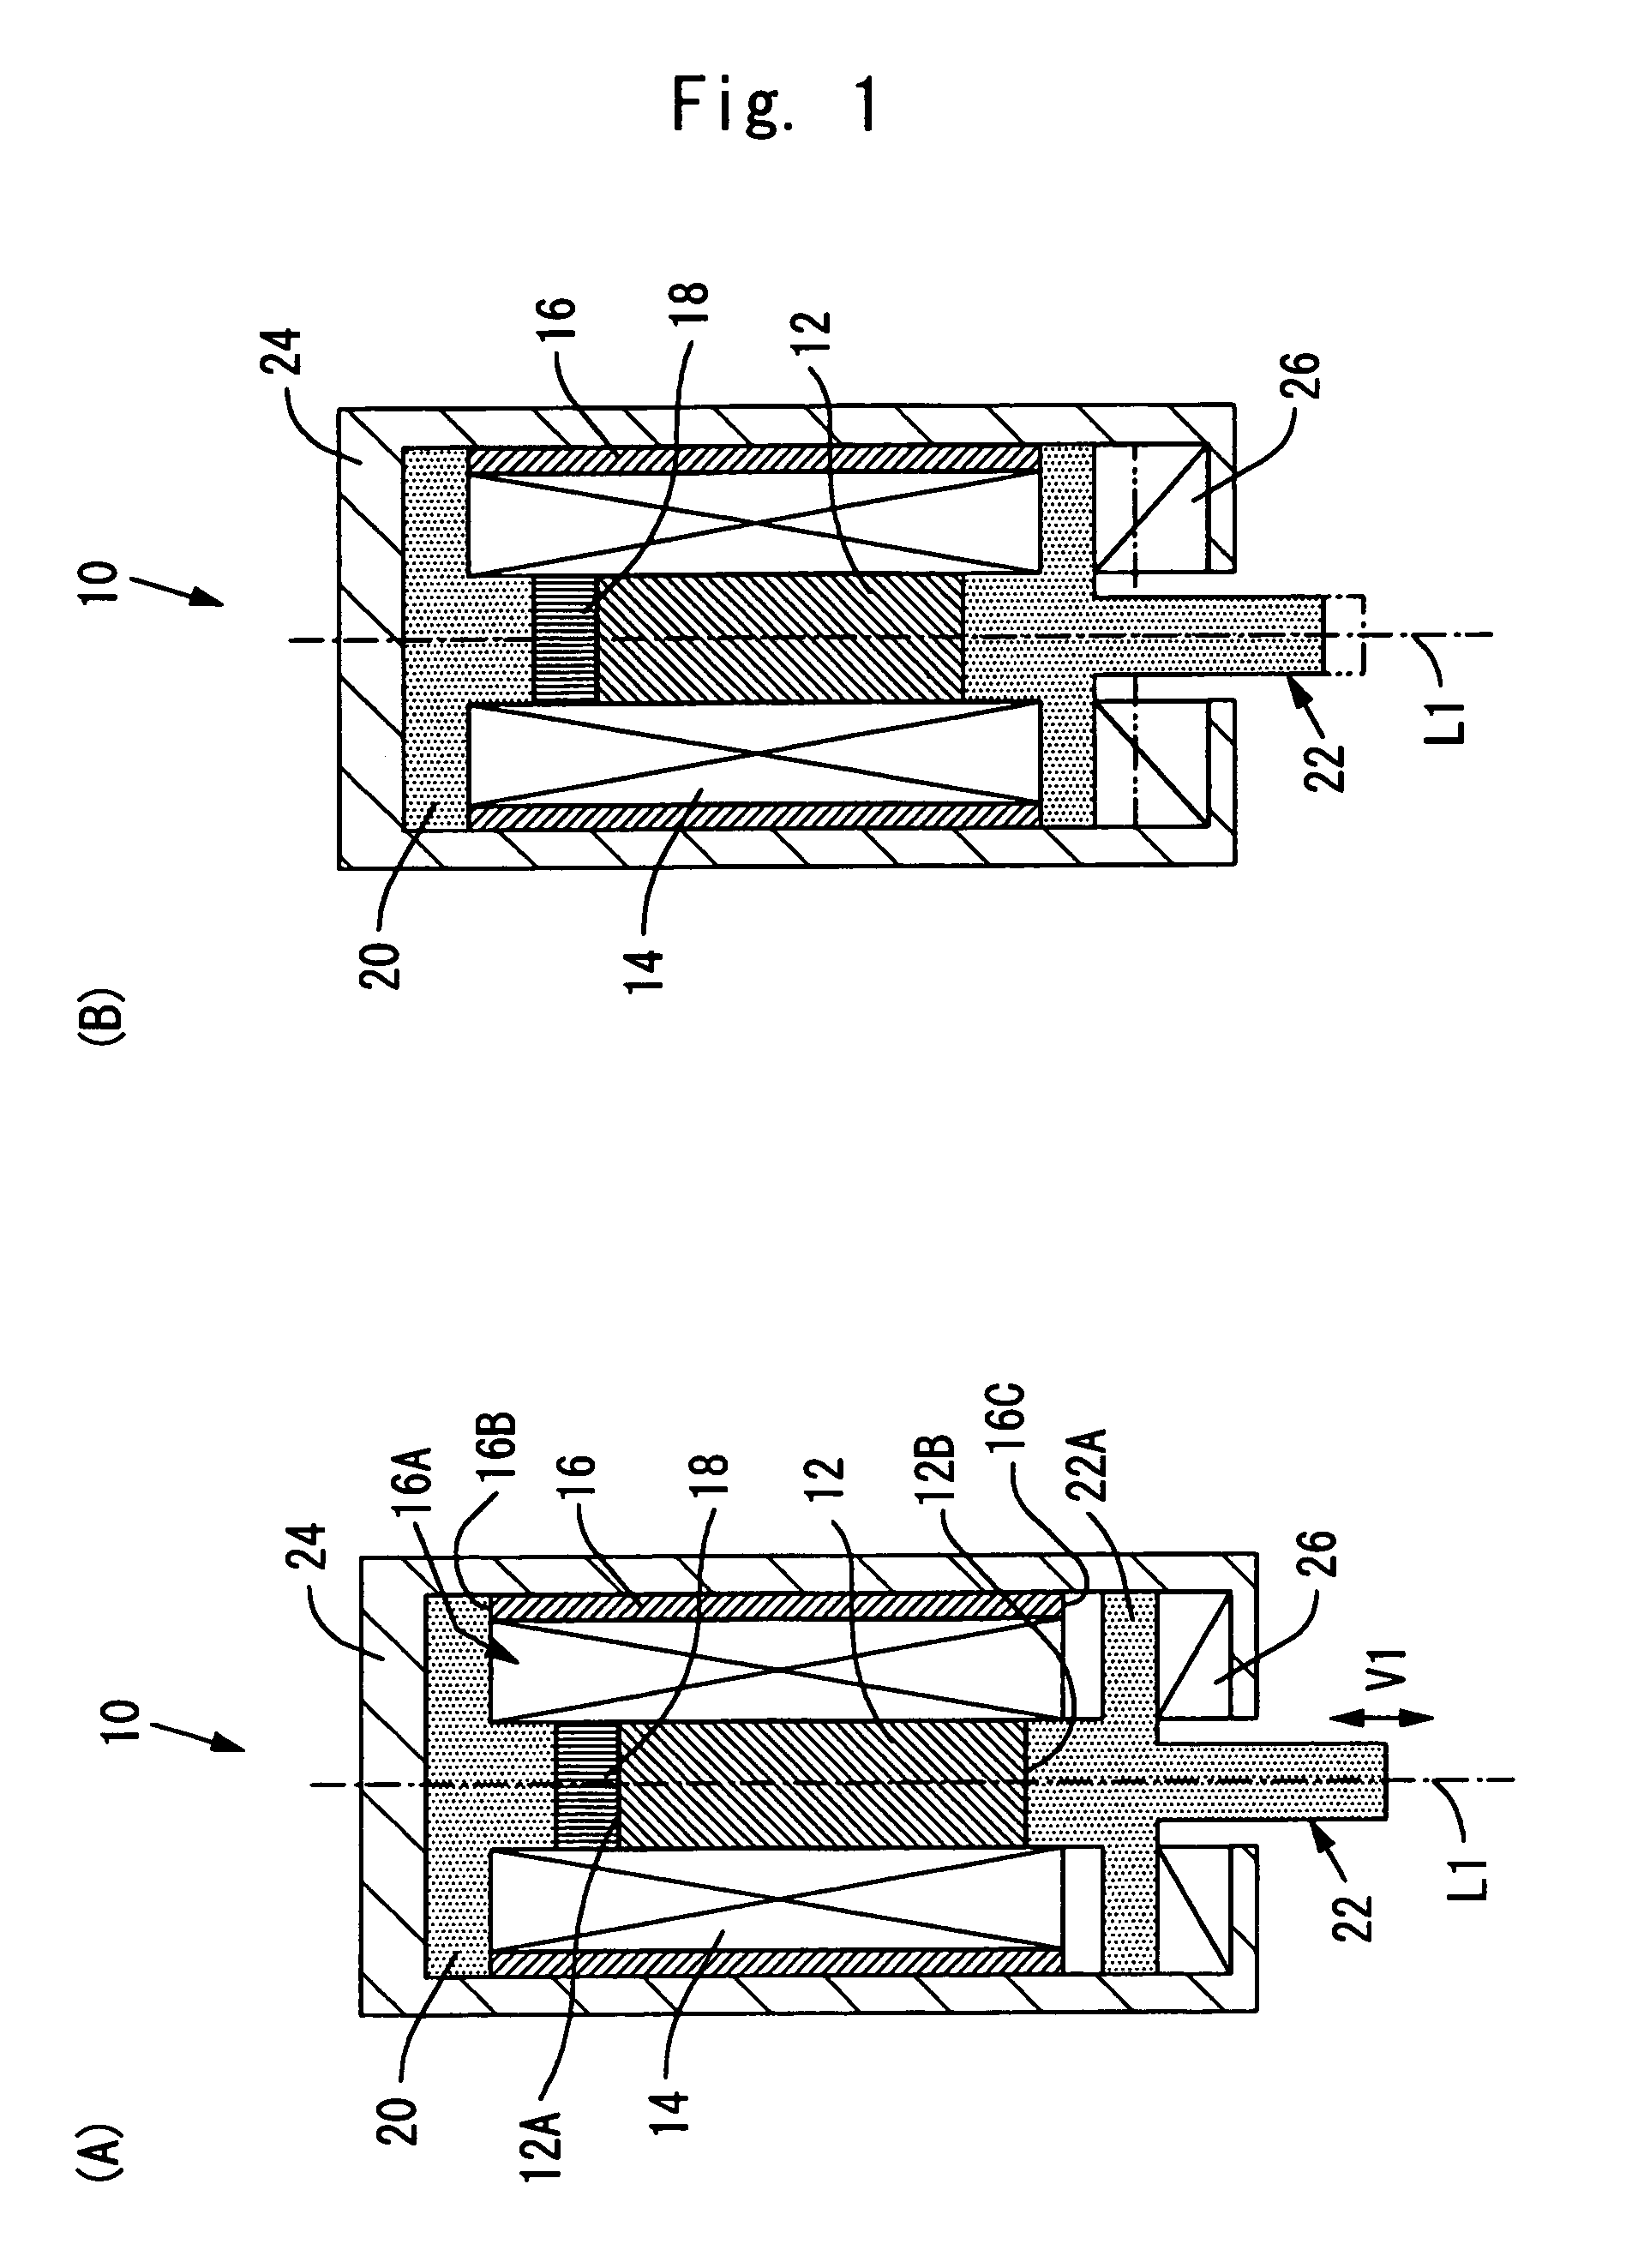 Contraction type actuator